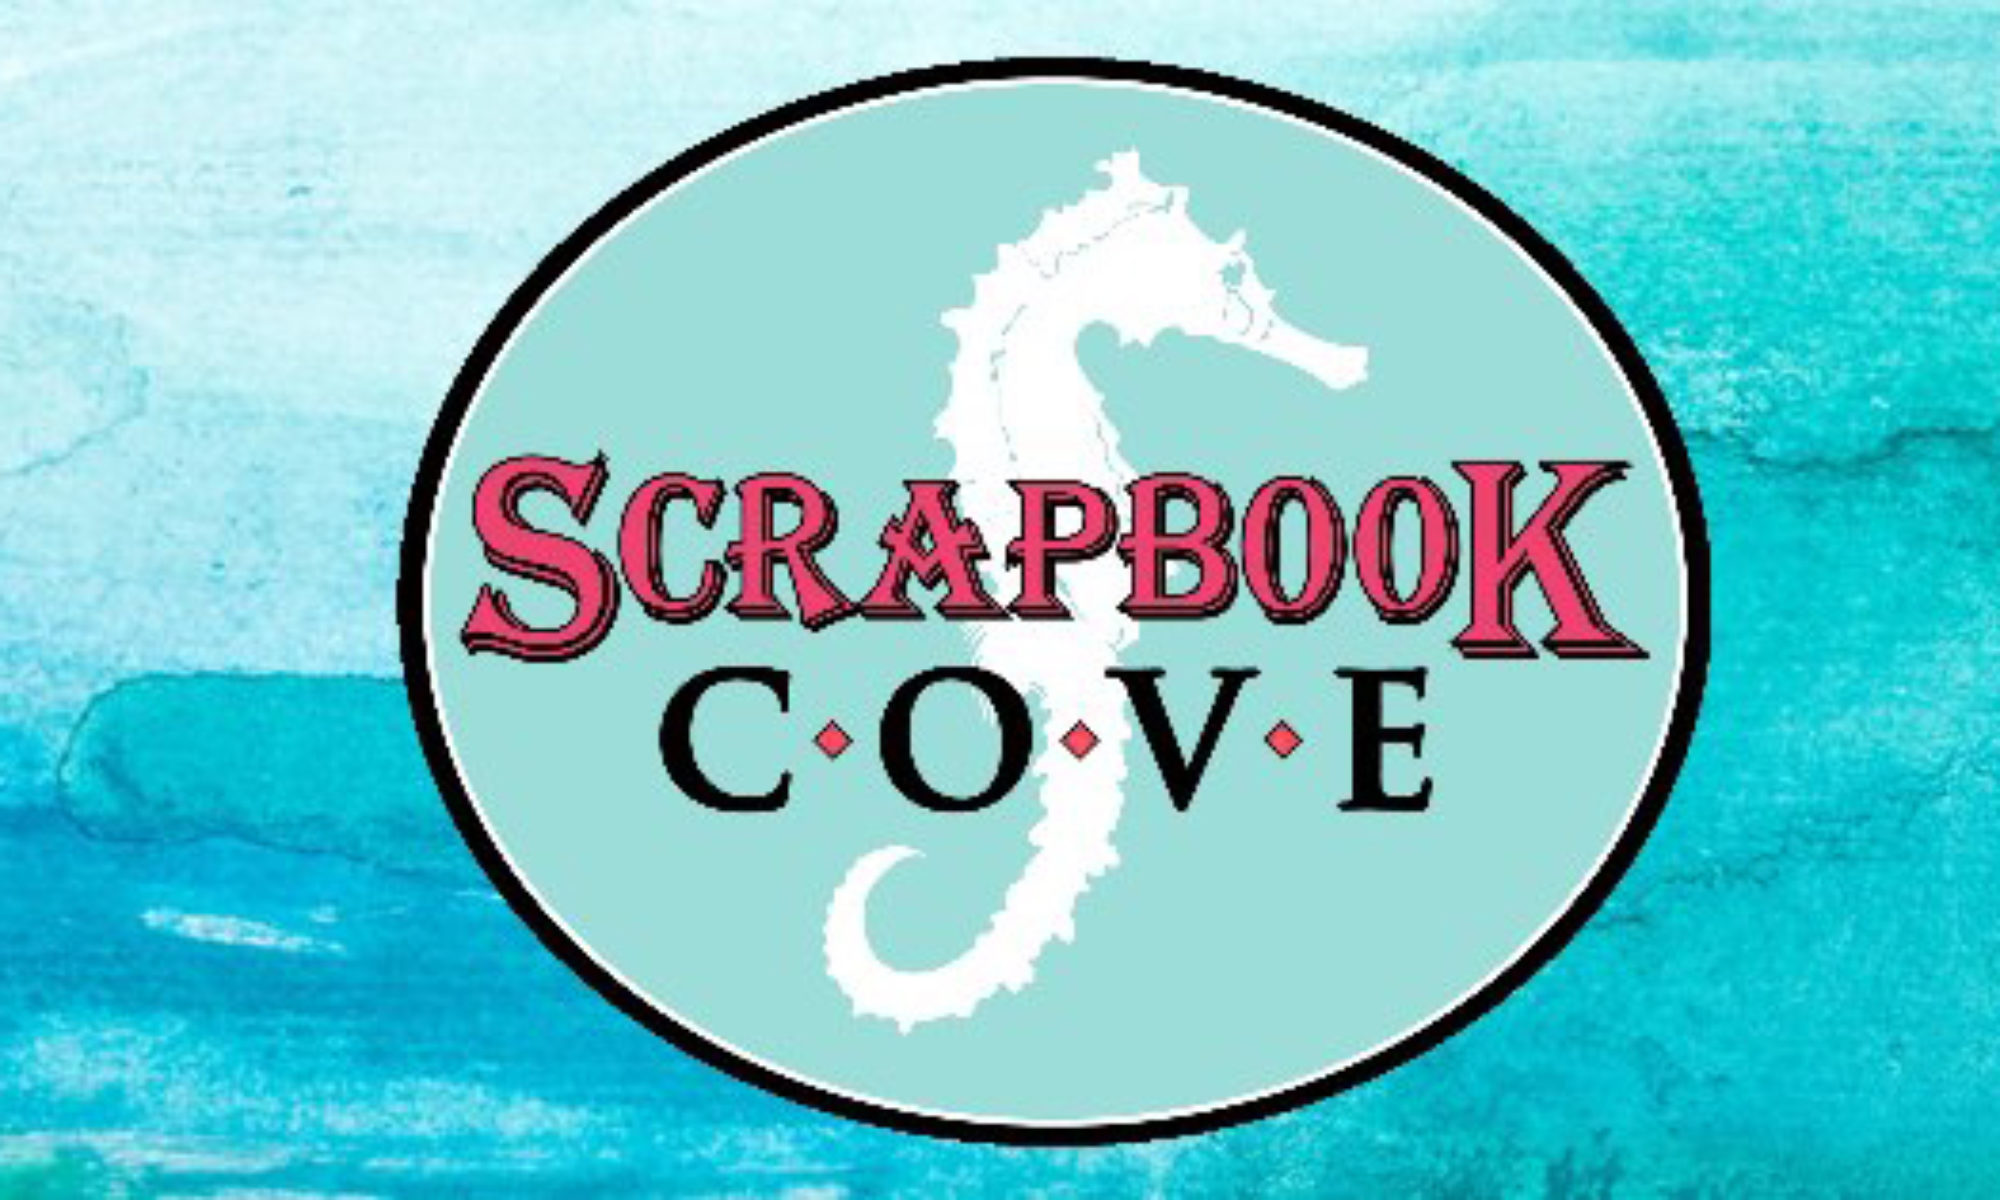 Scrapbooking - Paper Craft - Card Making Supplies - Albums - Kits - Die Cuts - Stamps